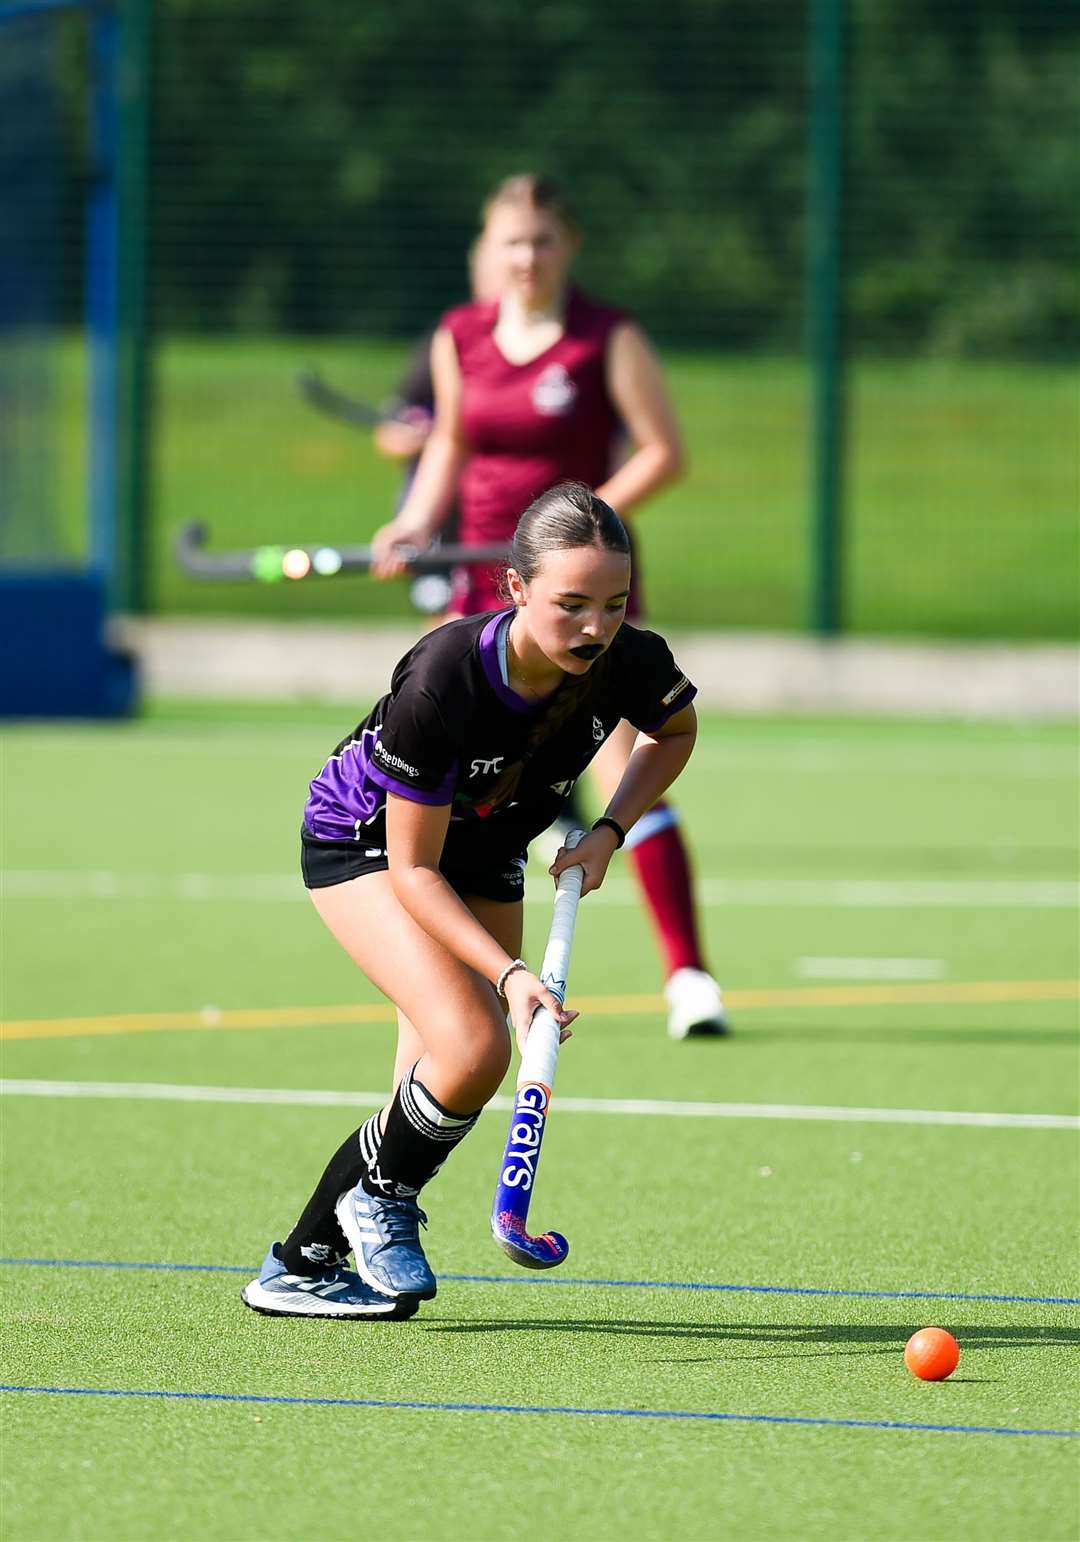 Mens and ladies sides from Pelicans Hockey Club hosted a pre-season tournament at Alive Lynnsport on Saturday. Picture: Ian Burt